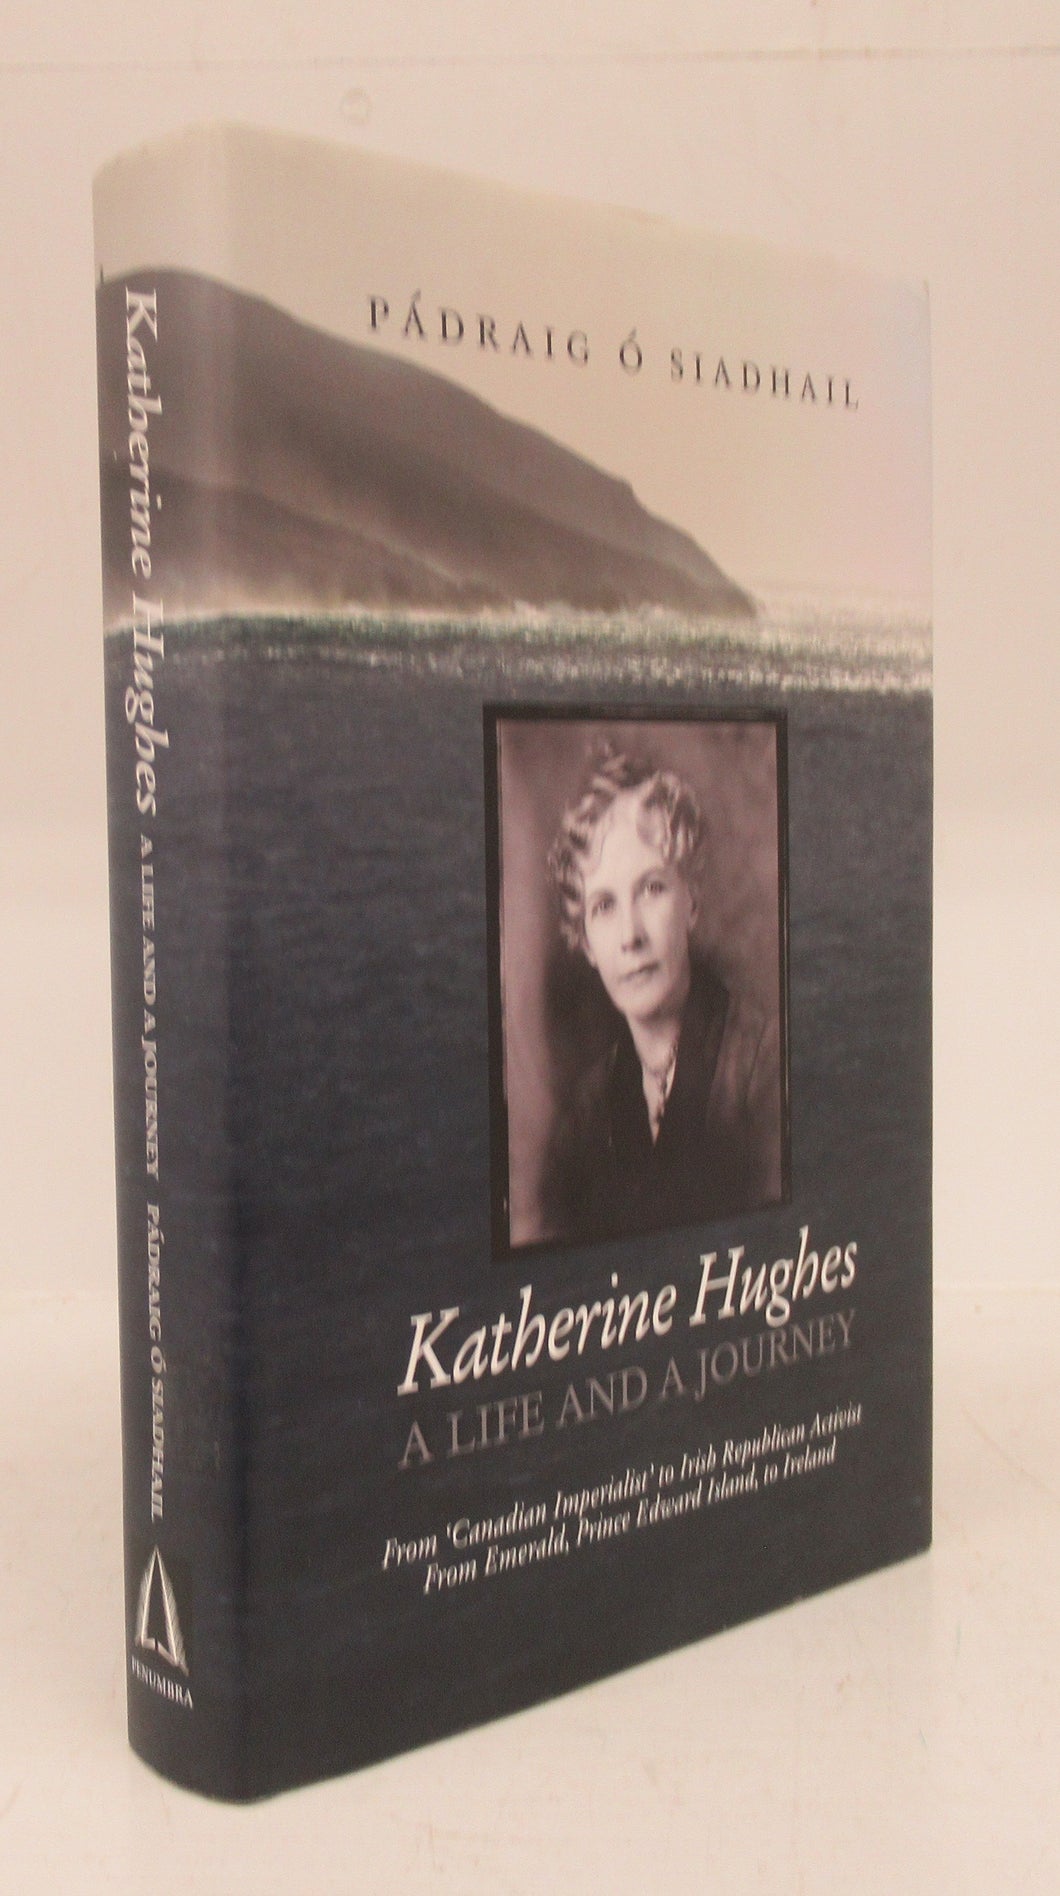 Katherine Hughes: A Life and a Journey